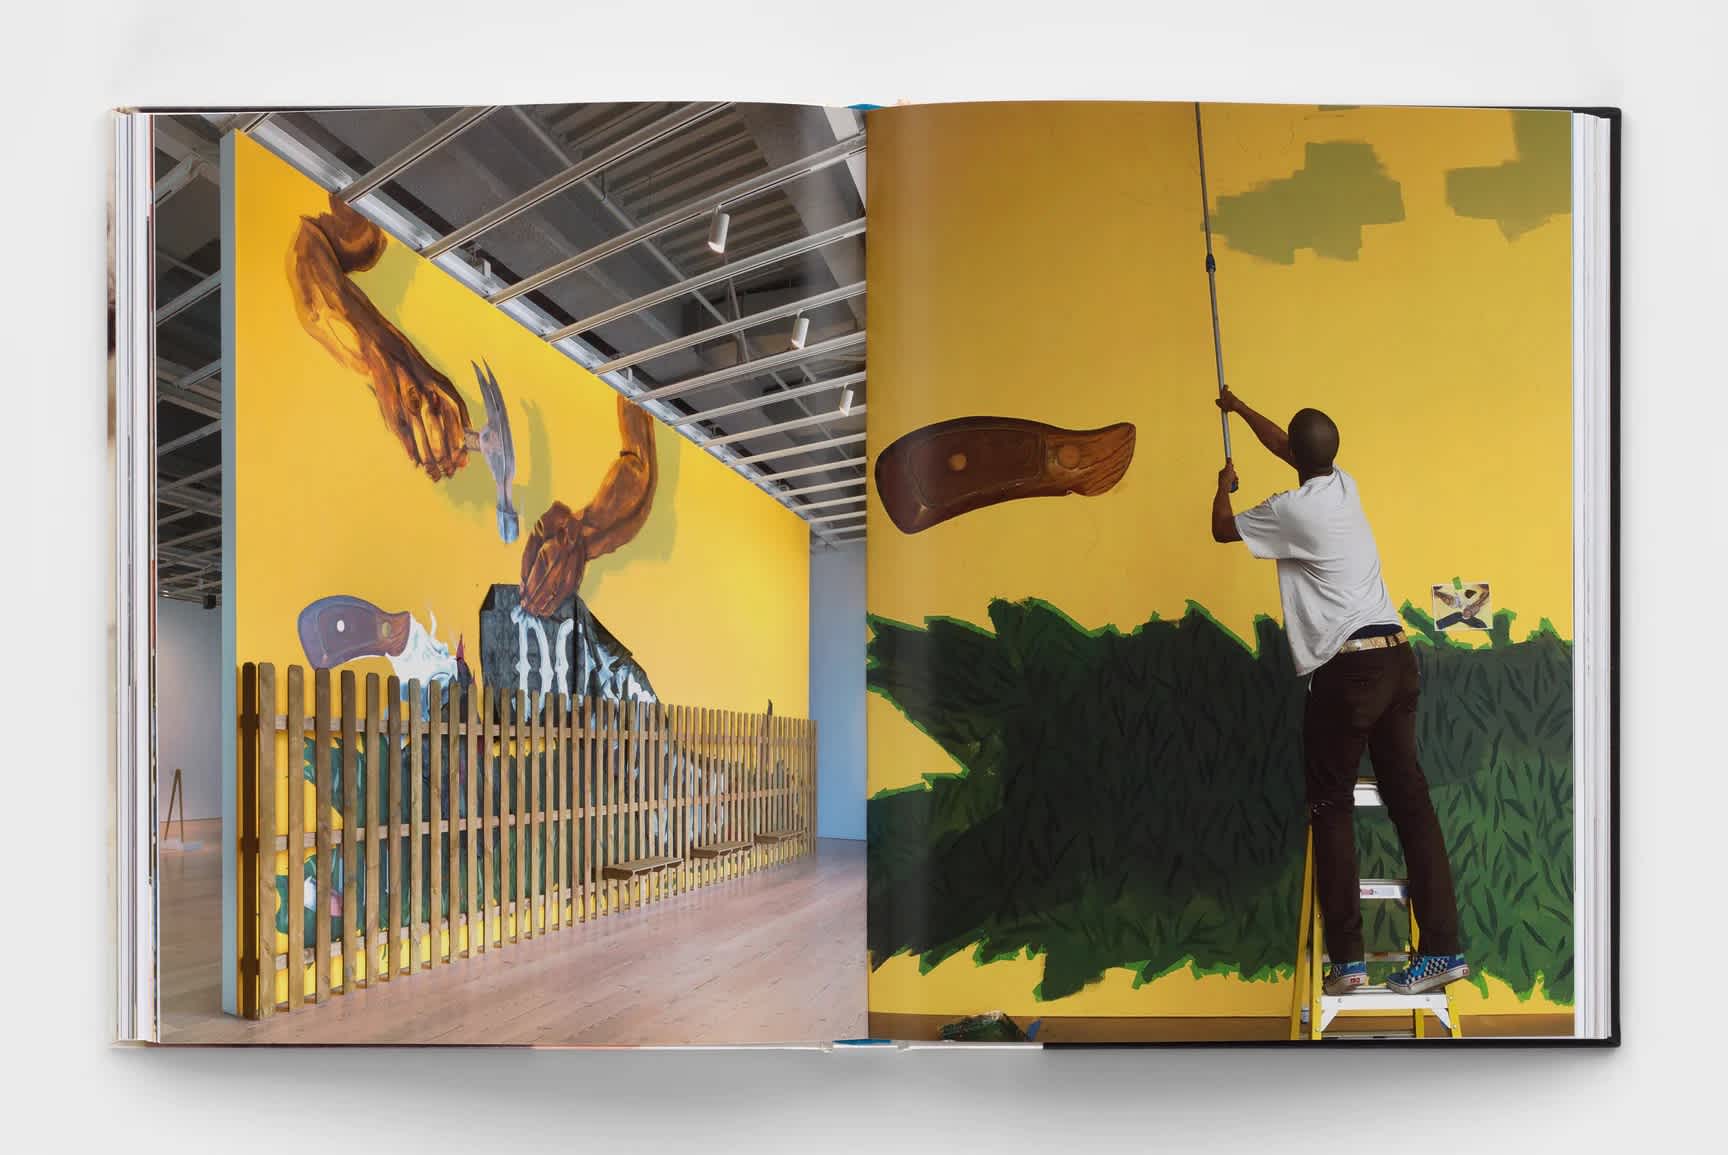 Open book which features an installation shot of a yellow, green and brown mural in a gallery space. The opposite page is a photograph of the artist installing the artwork.